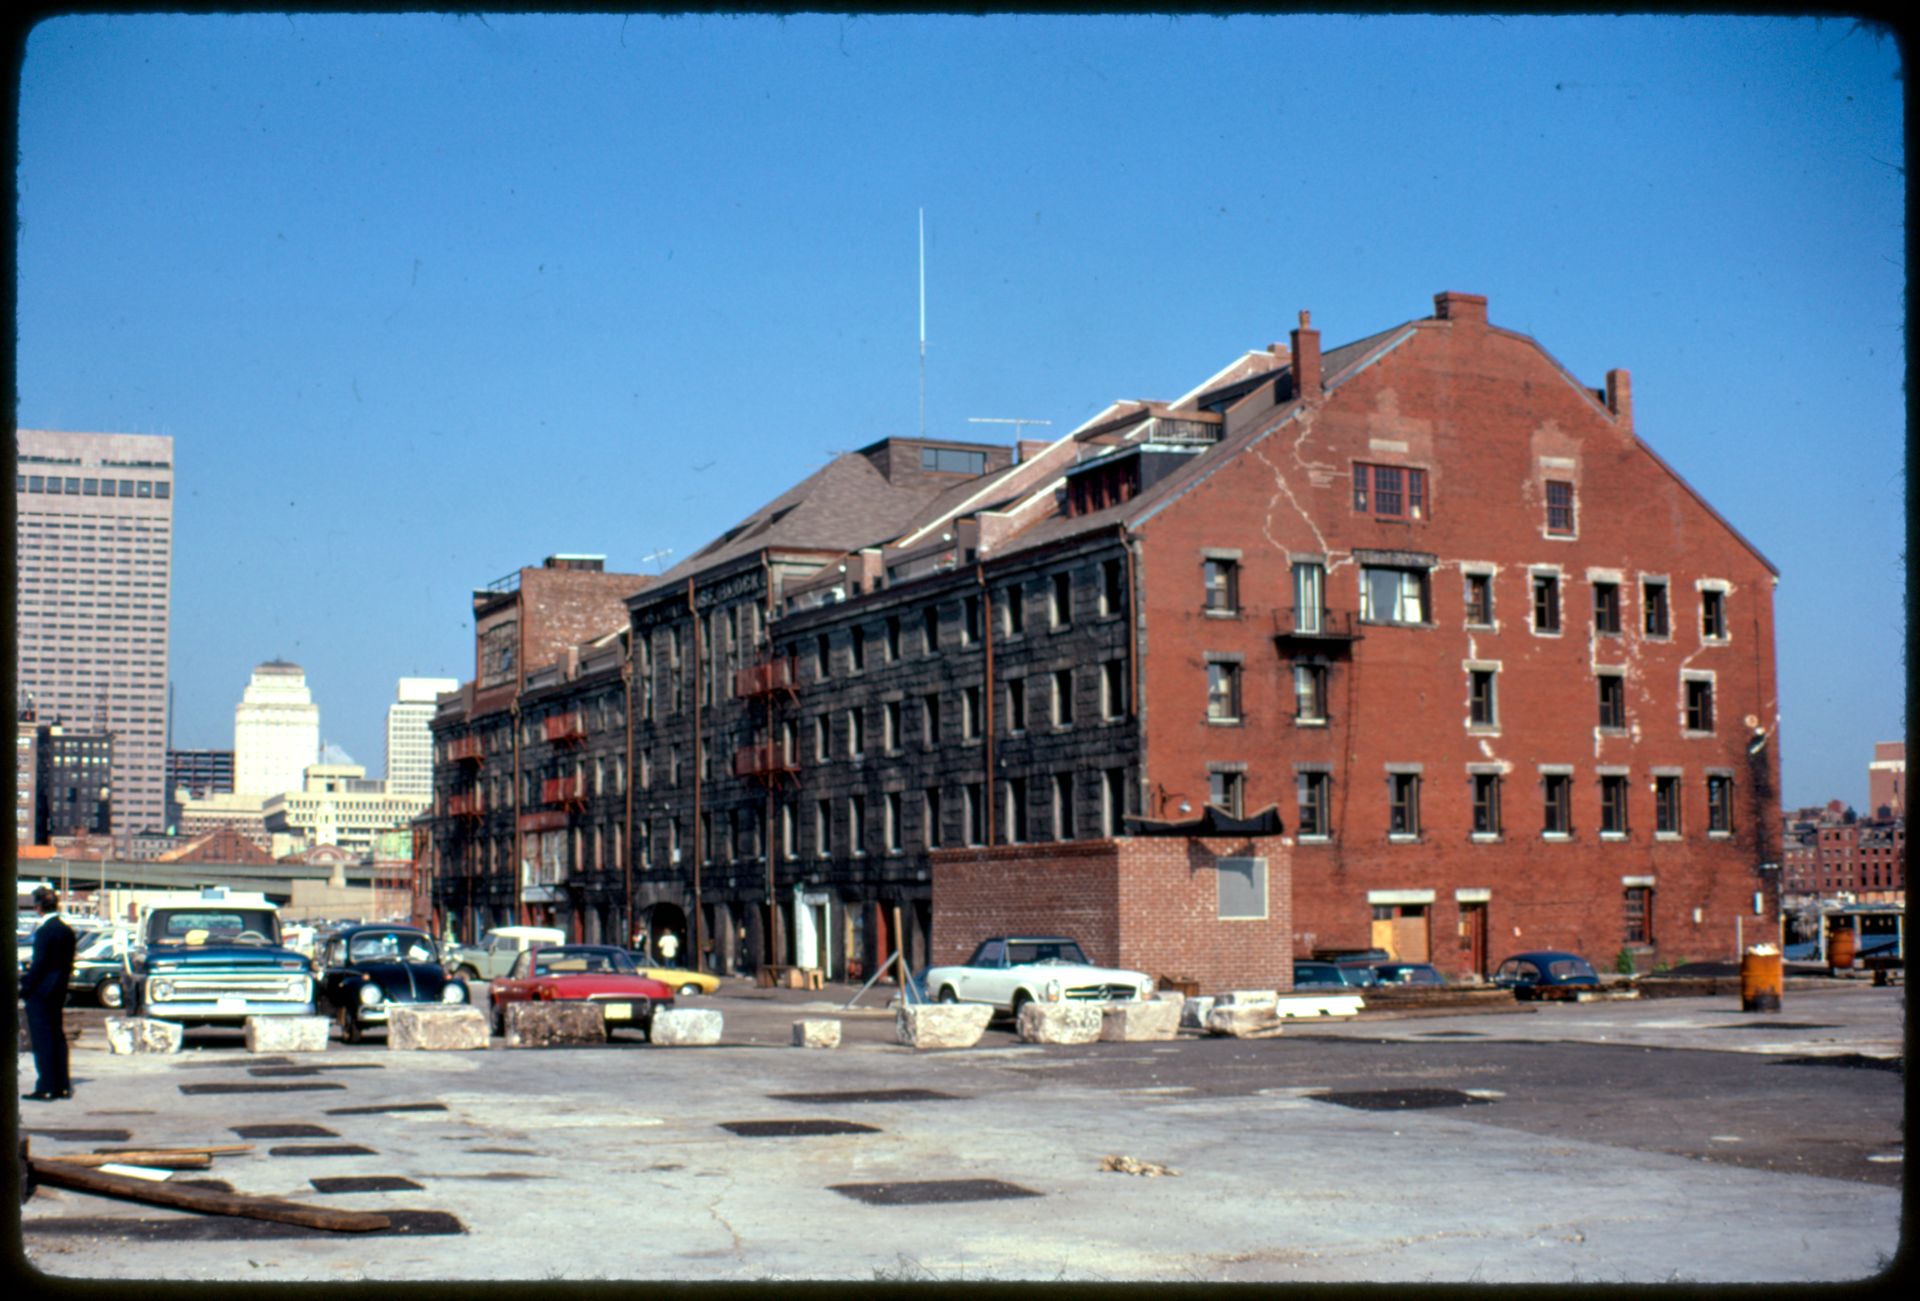 Photograph of brick building on Long Wharf